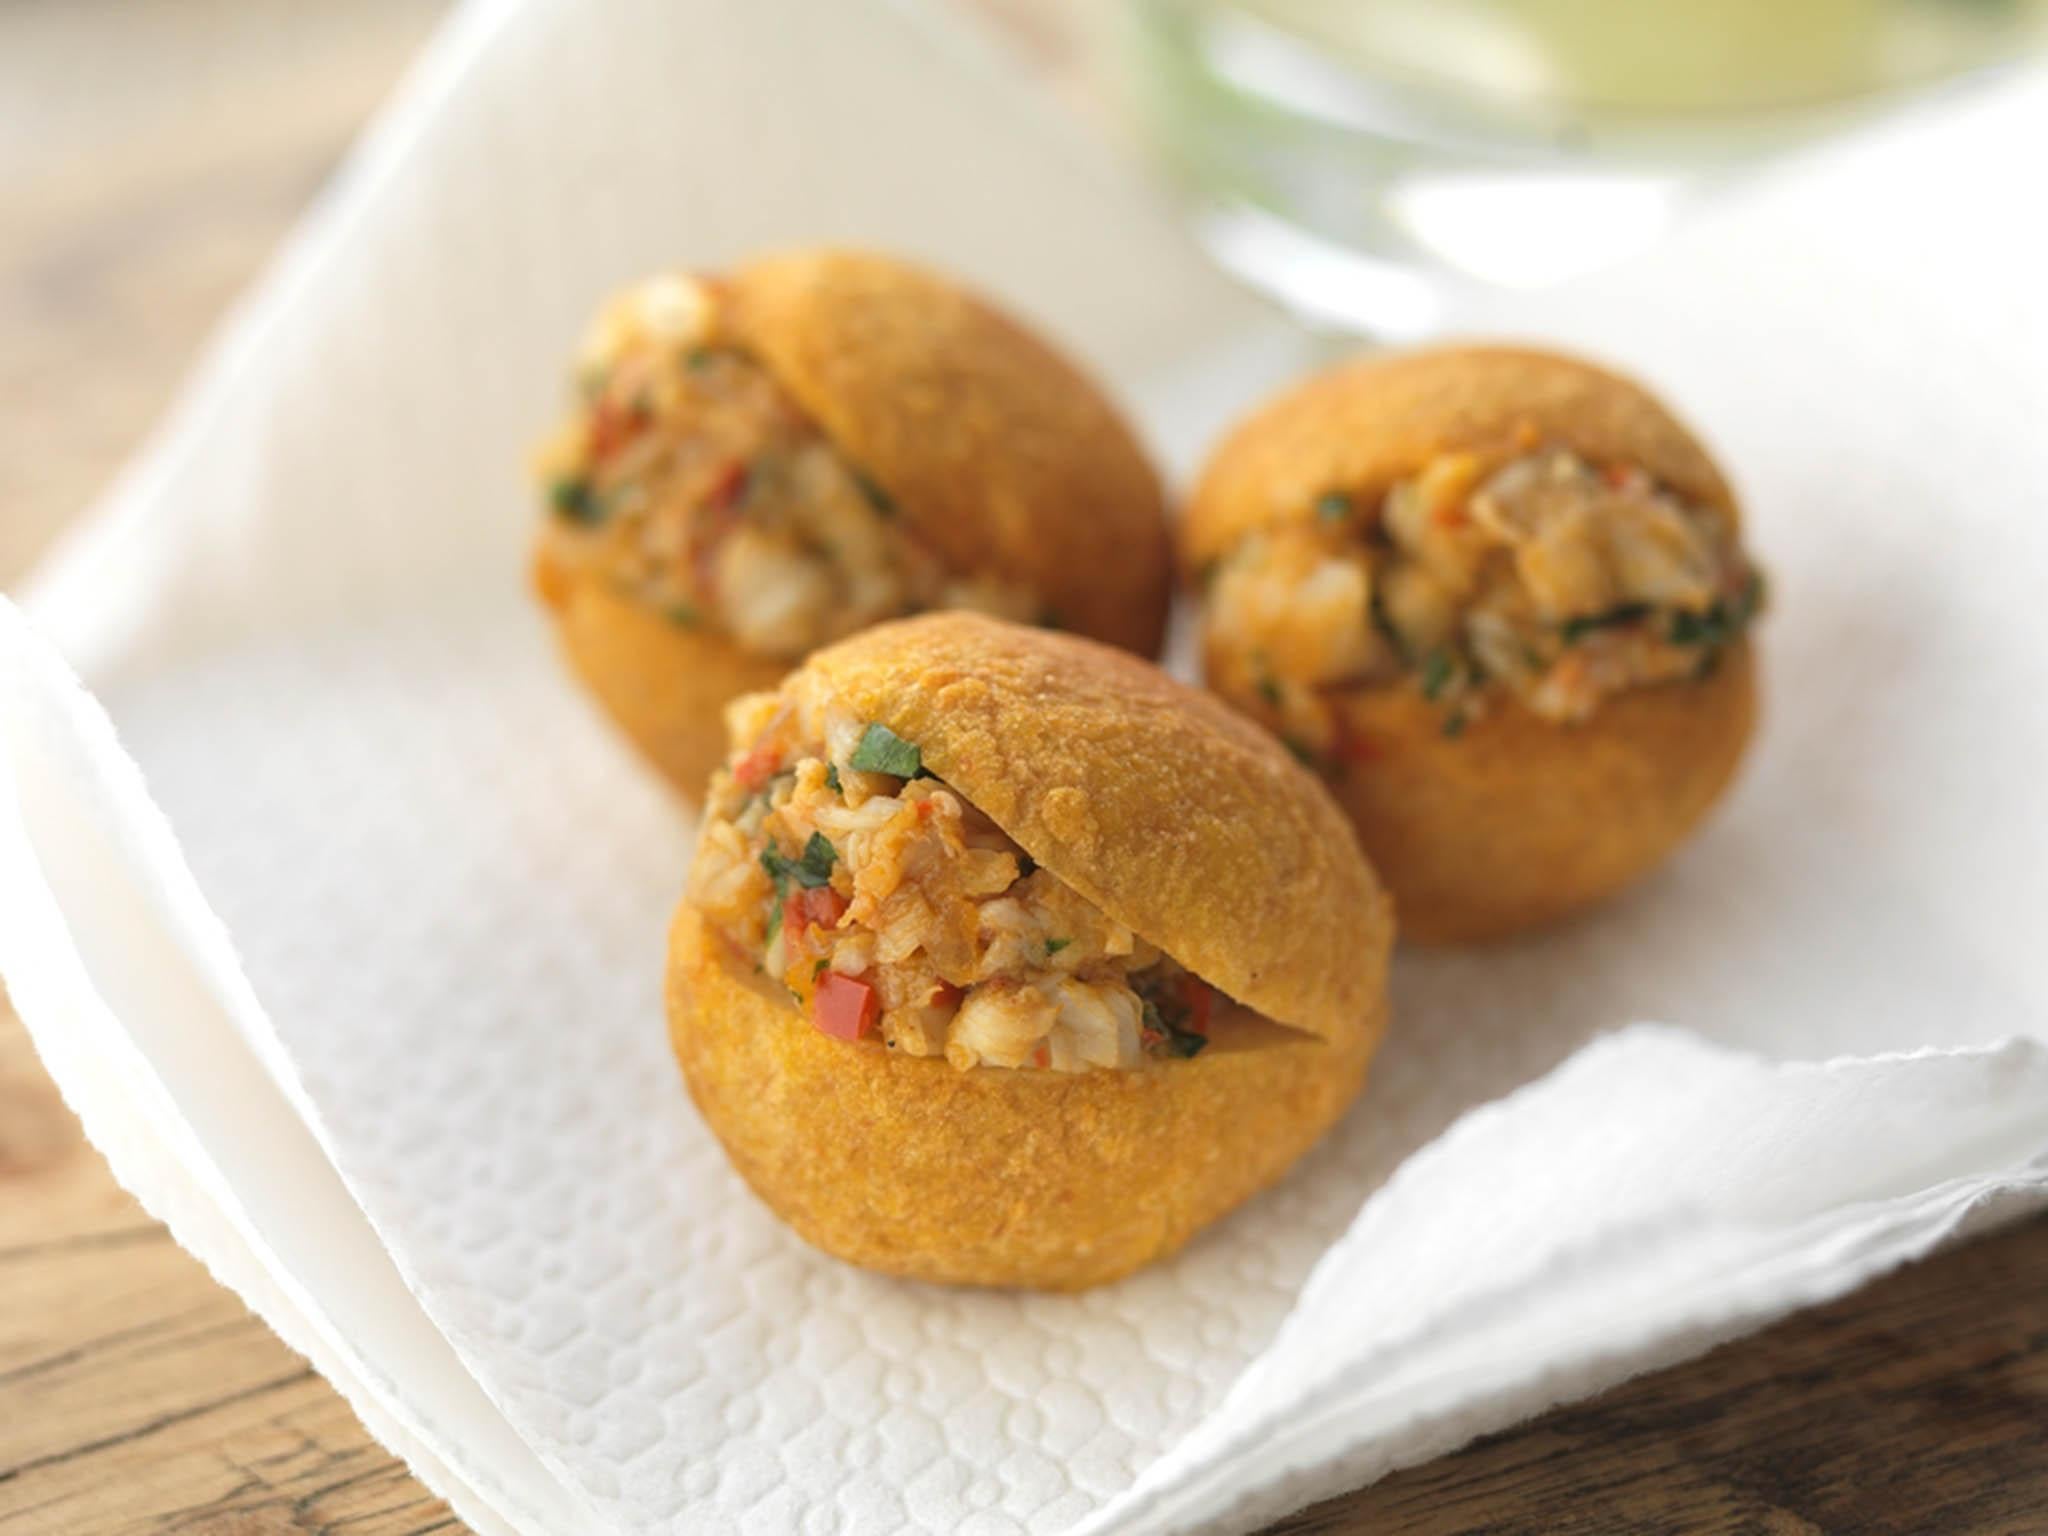 Deriving from an African infleunce, acarajé balls are stuffed with spicy fillings